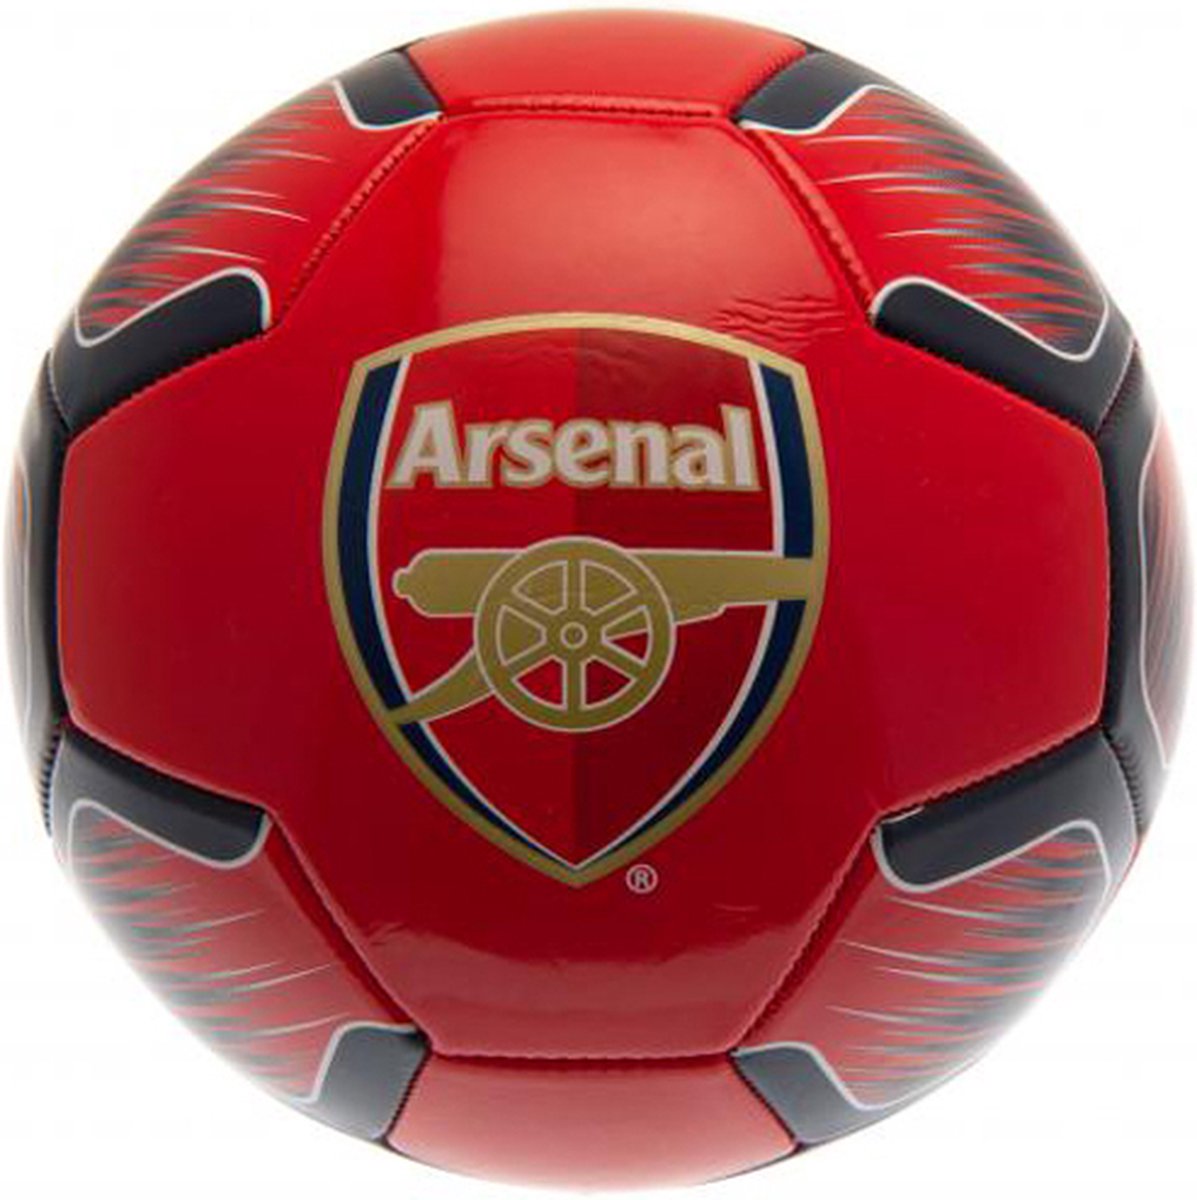 Arsenal voetbal - maat 5 - rood/blauw - NS